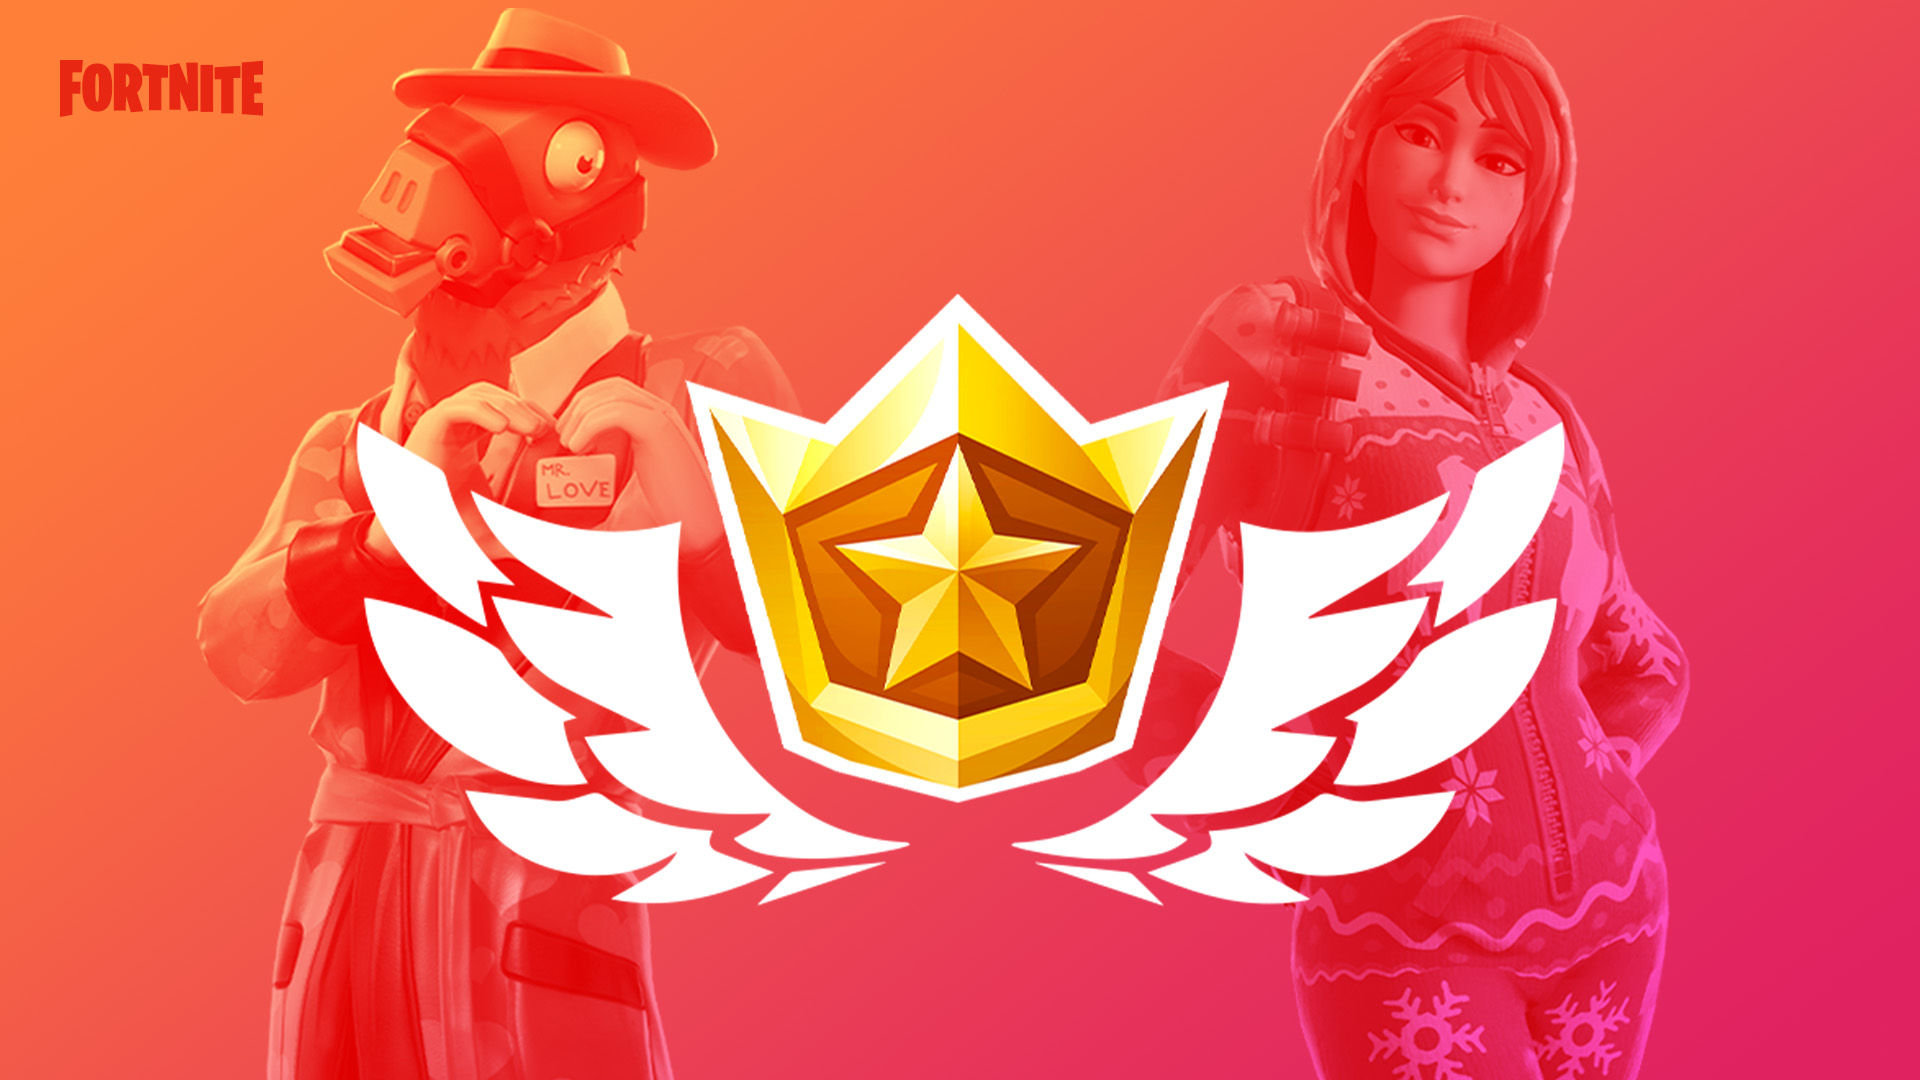 Fortnite Players Can Get The Next Battle Pass For